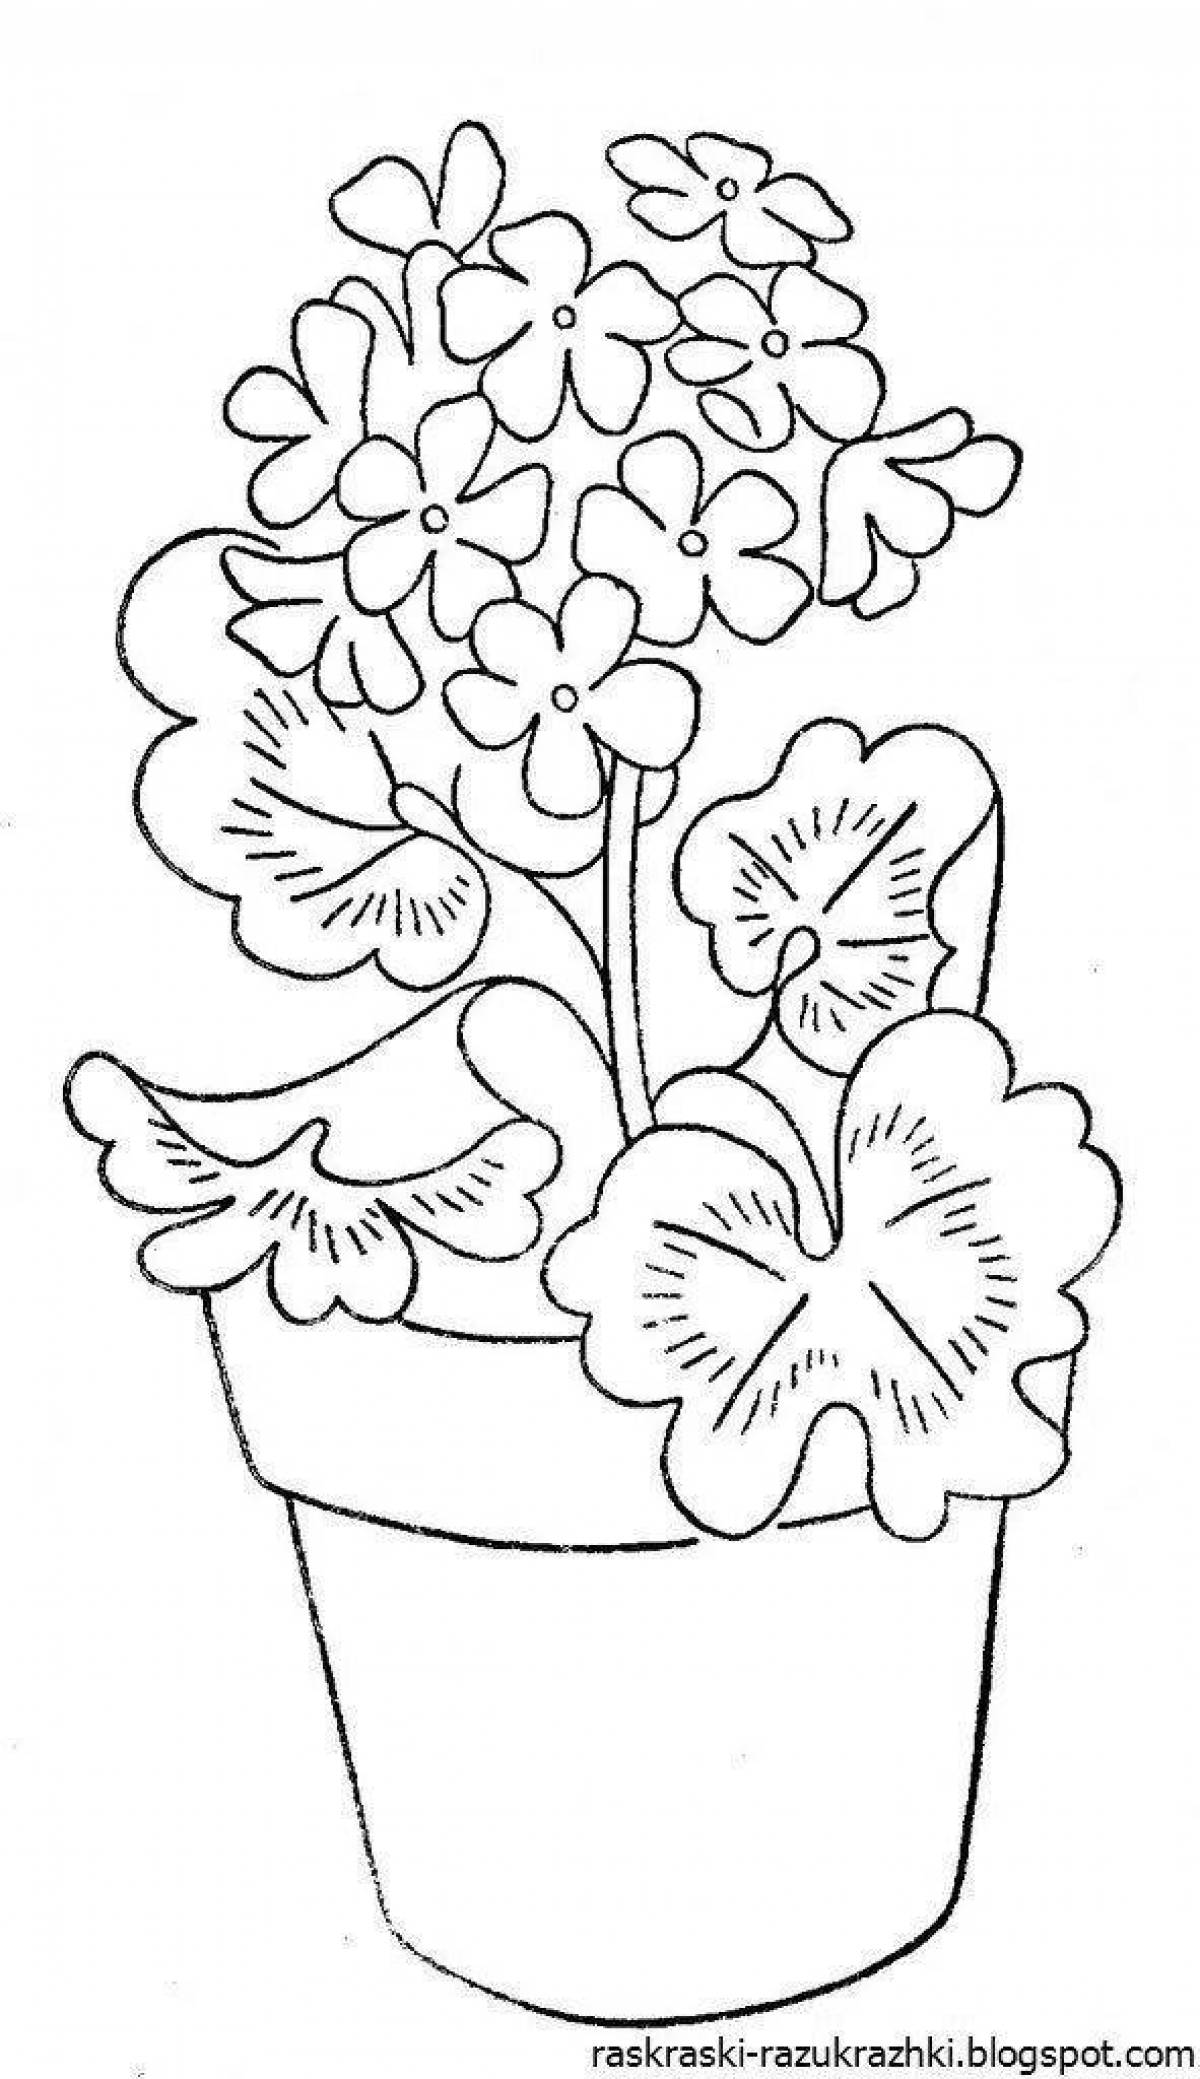 Adorable houseplant coloring book for kids